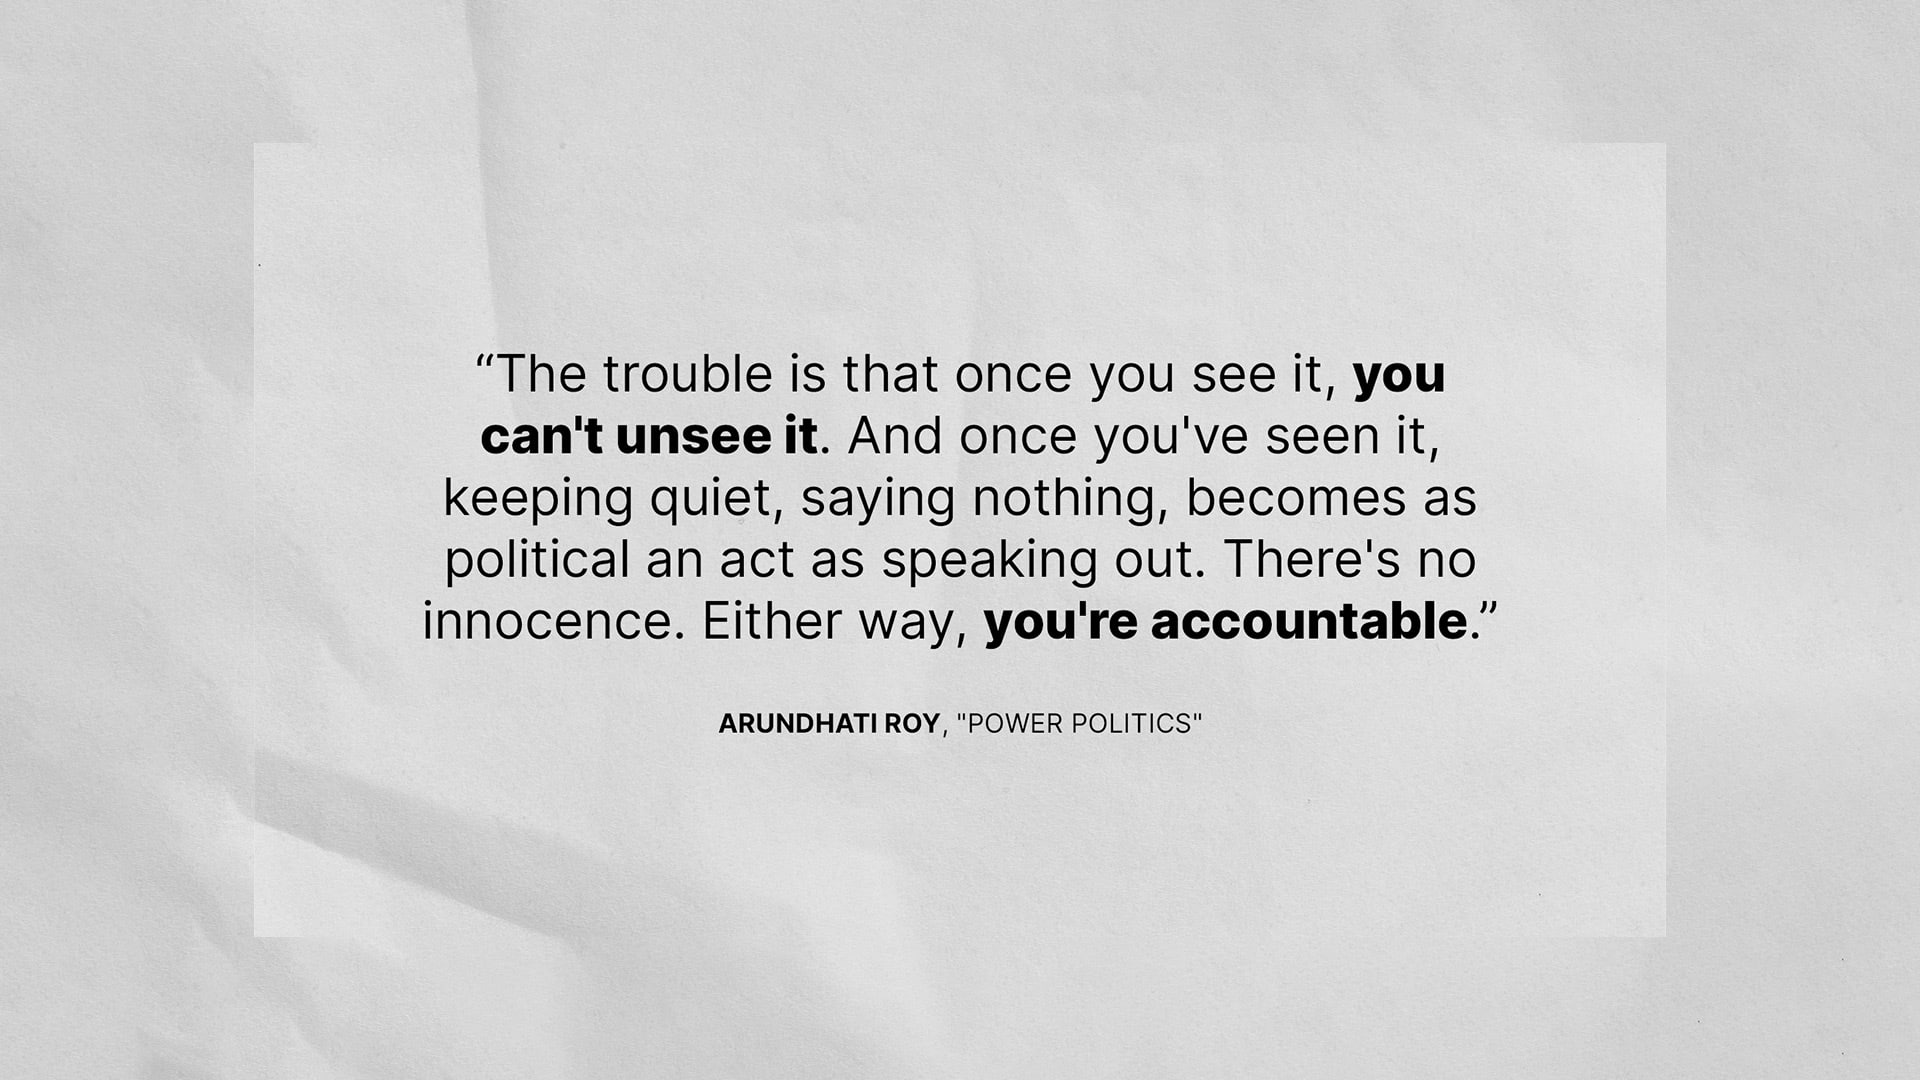 "The trouble is that once you see it, you can't unsee it. And once you've seen it, keeping quiet, saying nothing, becomes as political an act as speaking out. There's no innocence. Either way, you're accountable." - Arundhati Roy, "Power Politics"